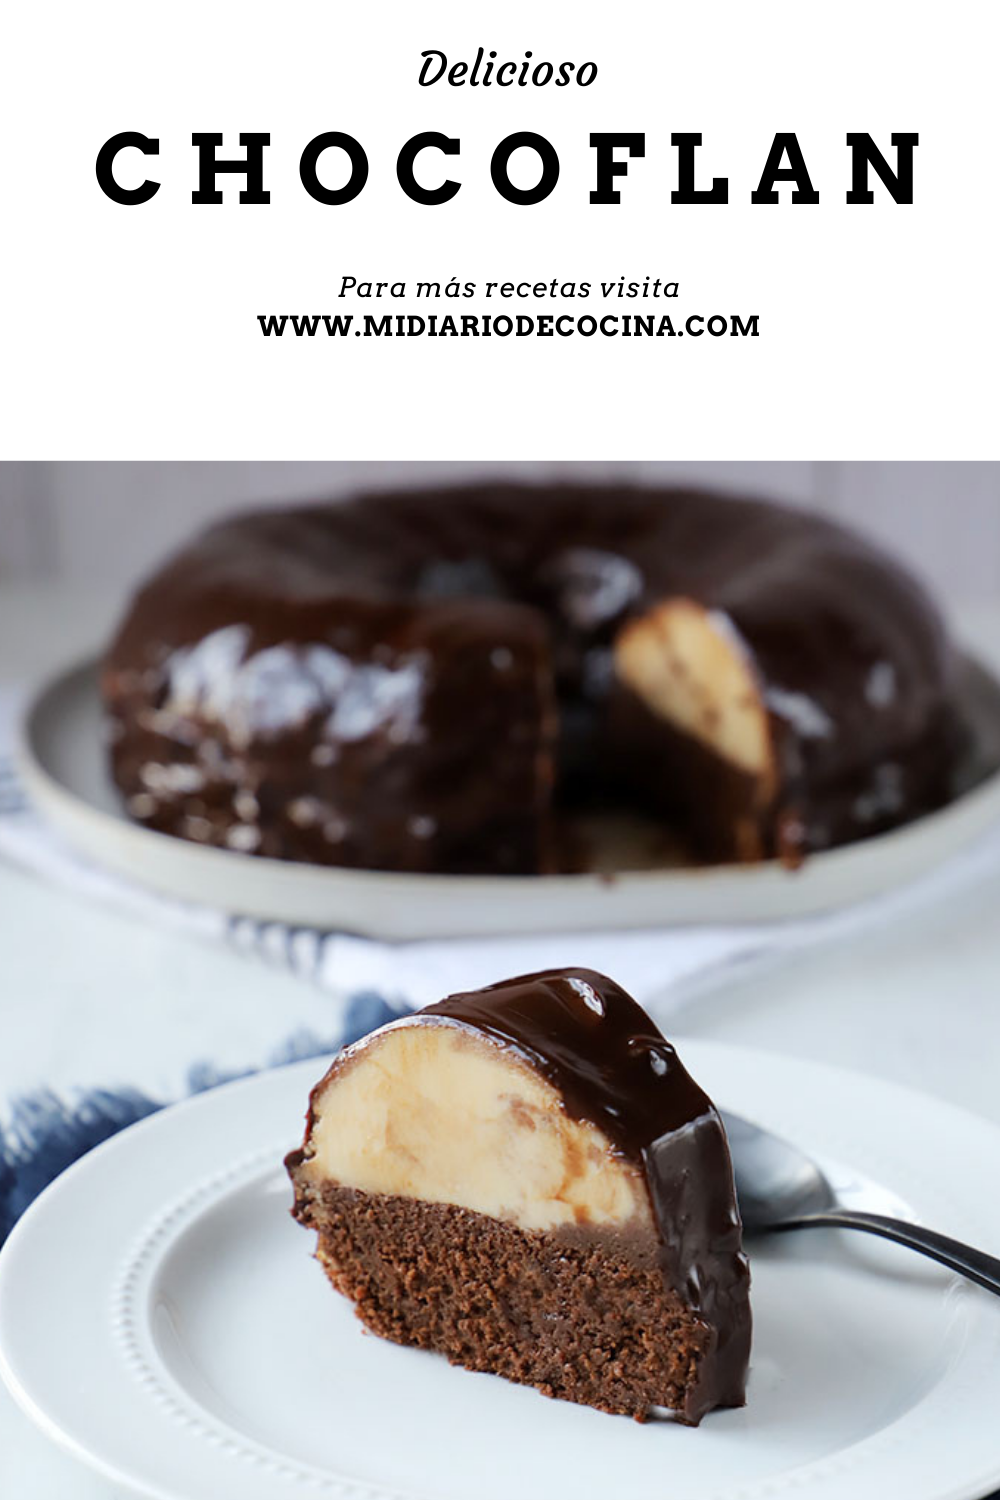 https://www.midiariodecocina.com/wp-content/uploads/2020/12/Chocoflan.png